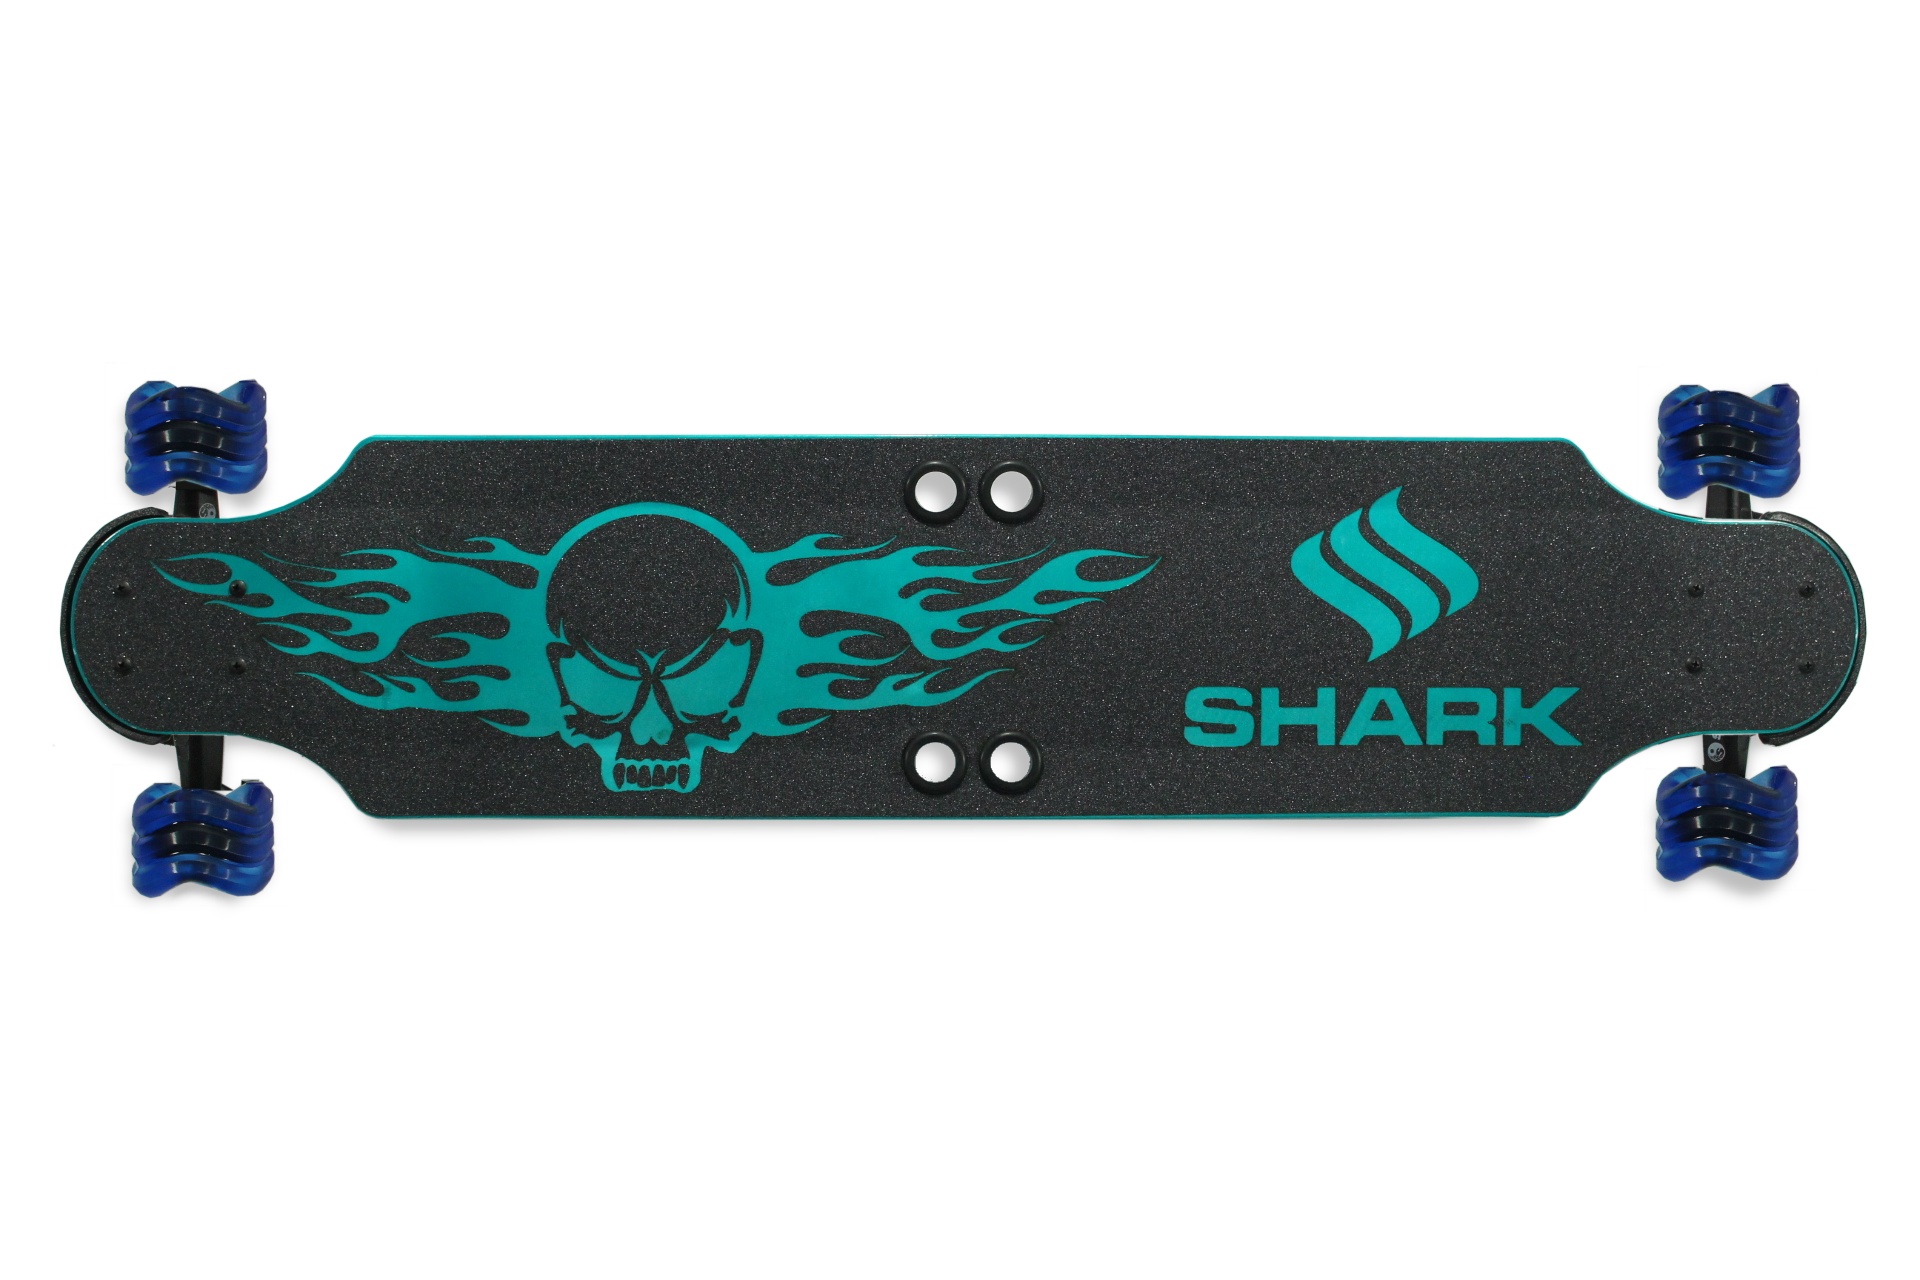 Aluminum 38" Turquoise Drop Down Longboard by Shark Wheel with Sapphire Wheels